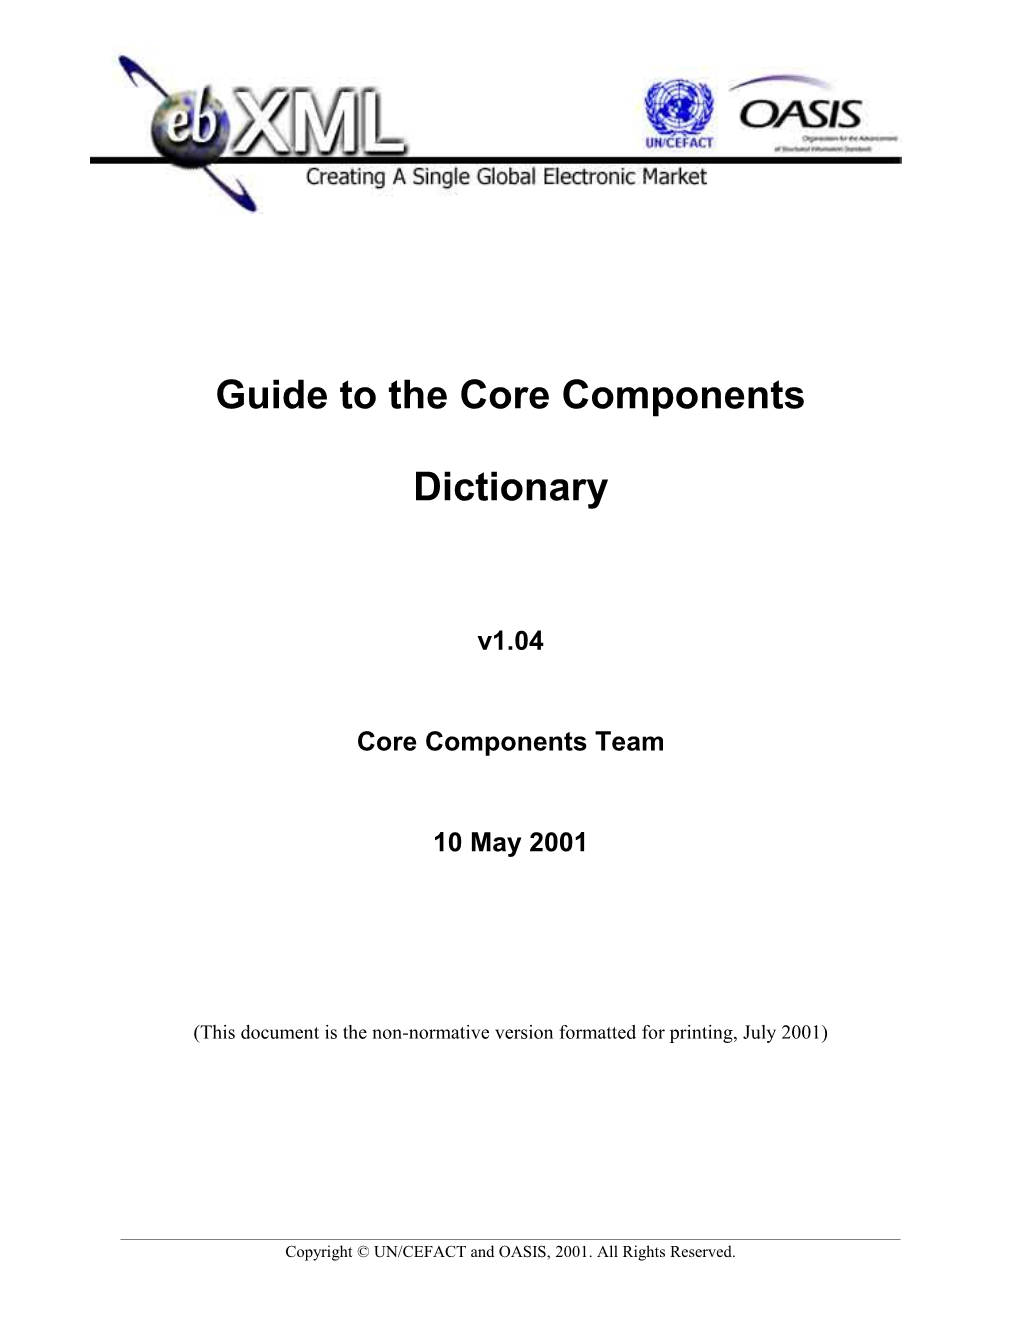 Guide to the Core Components Dictionary